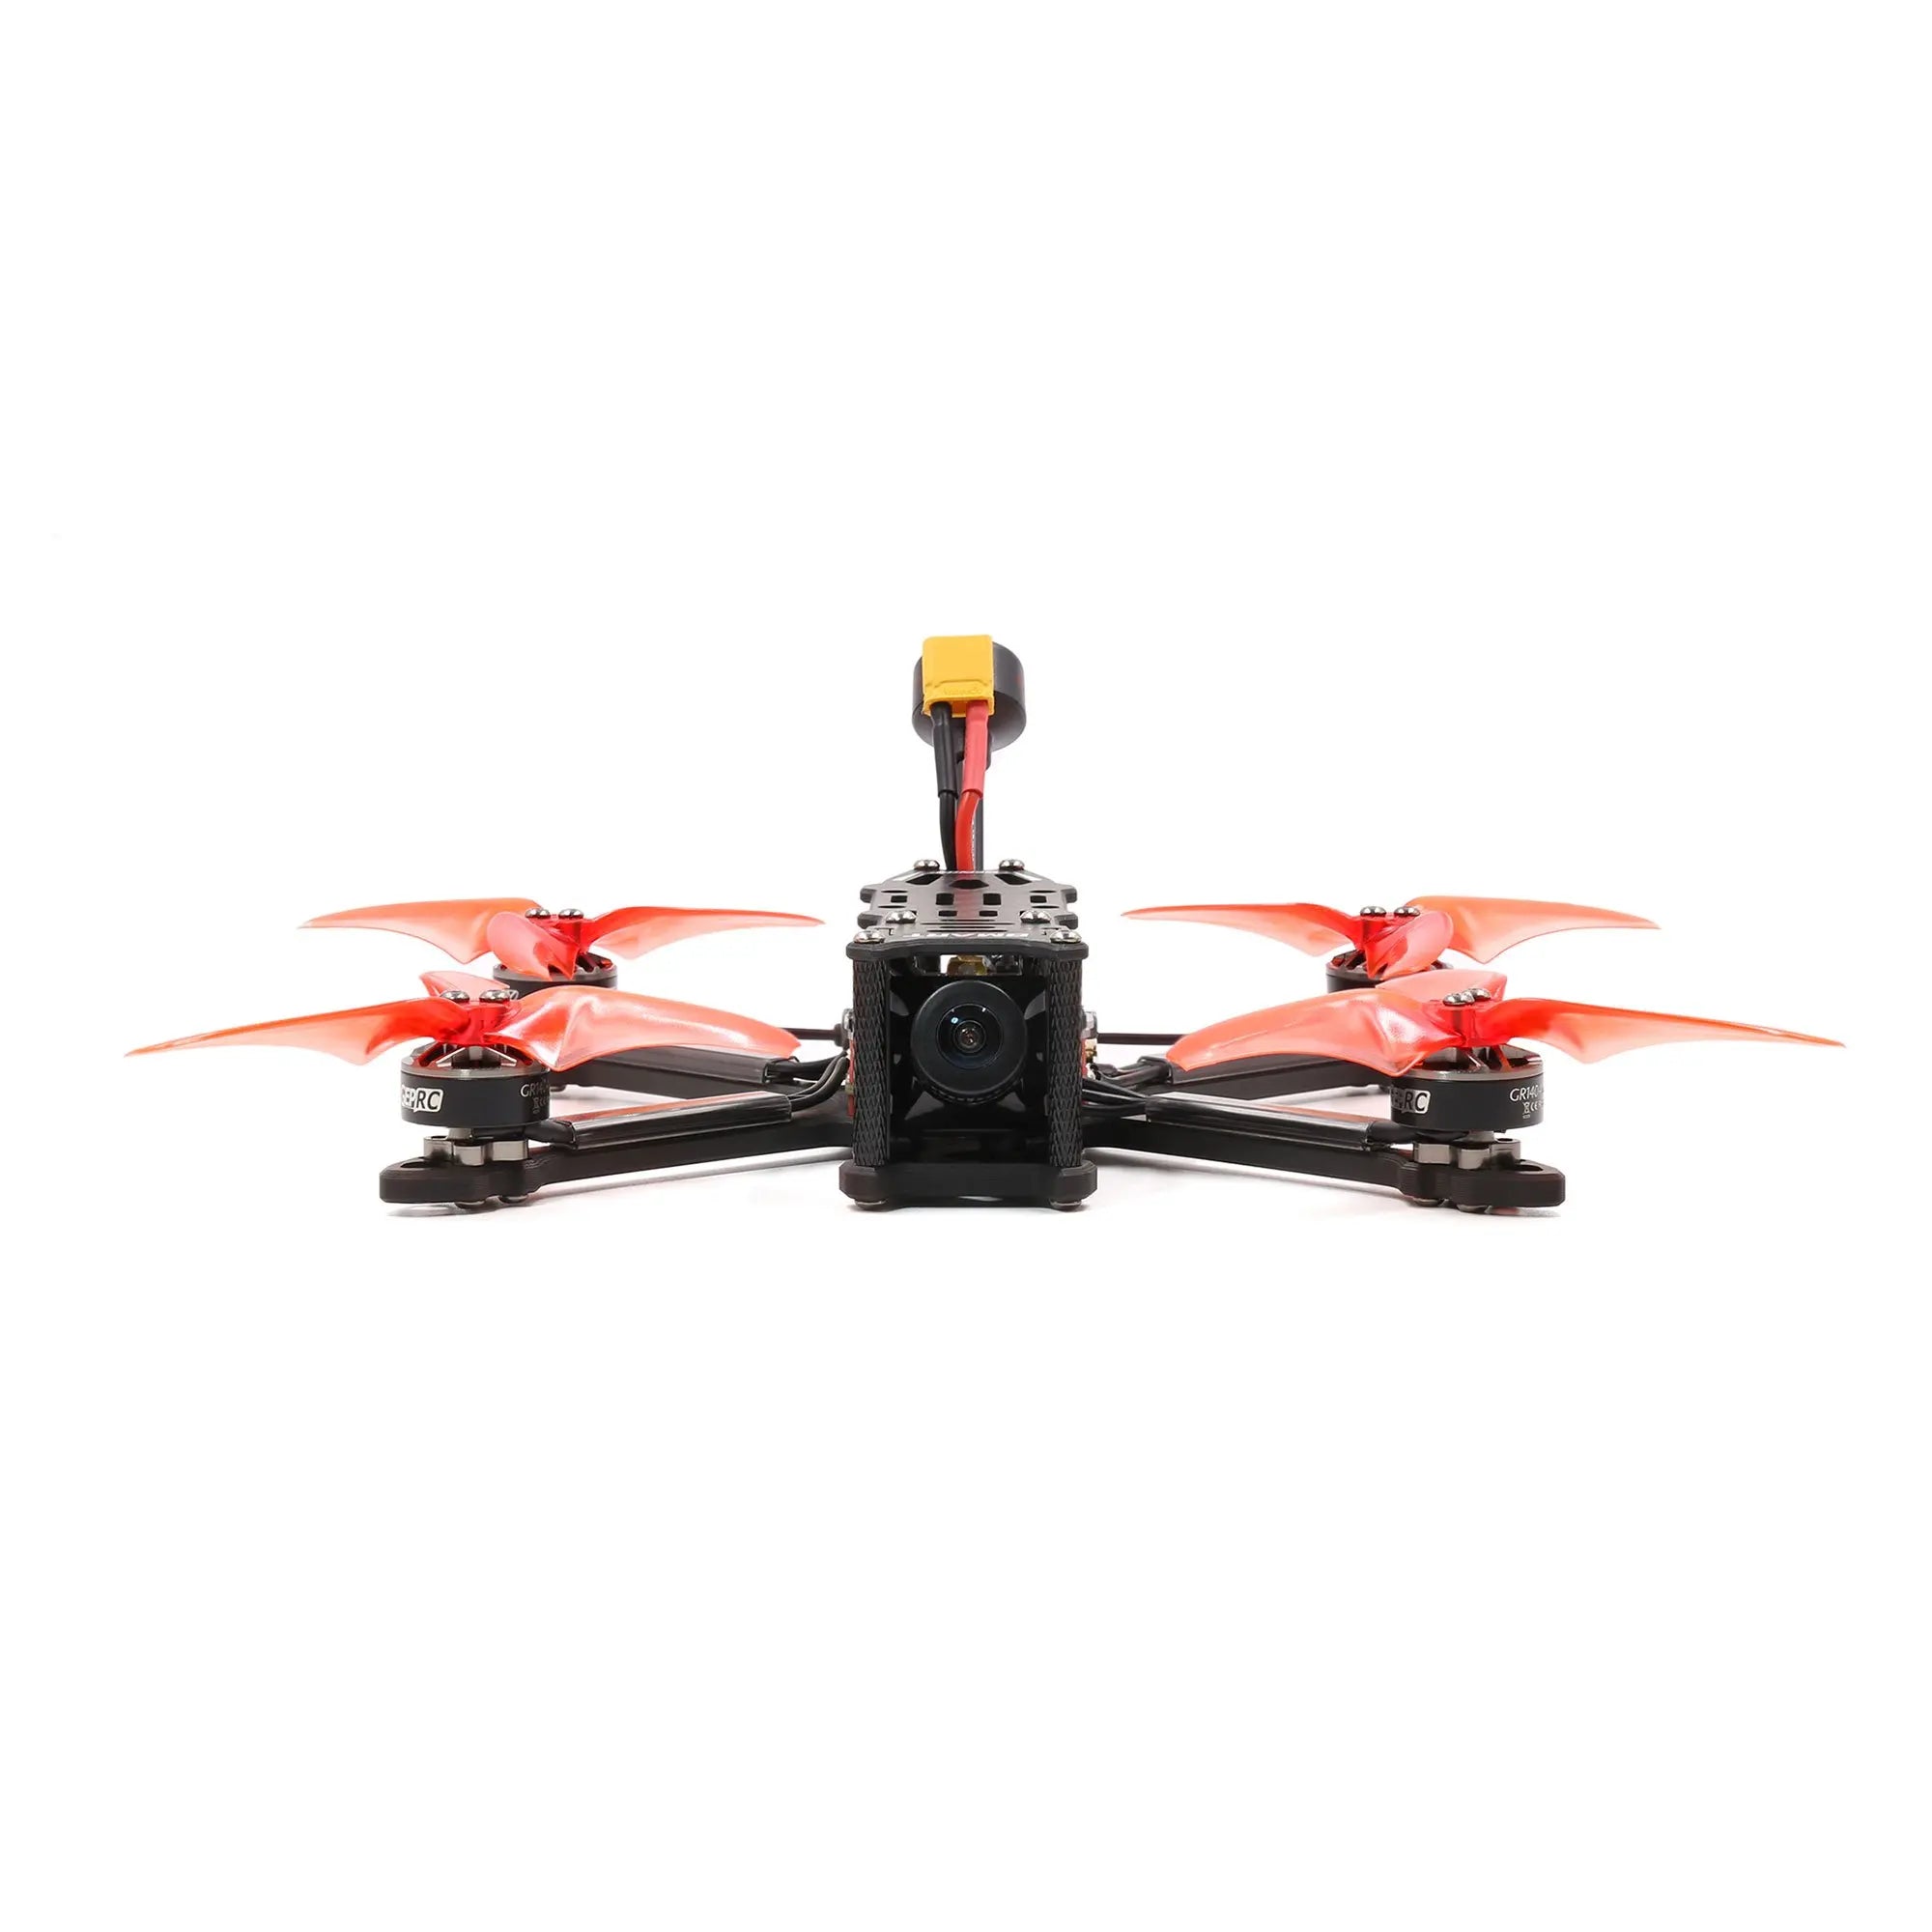 GEPRC SMART 35 FPV Drone, SMART 35 Freestyle is the first choice of 3.5-inch Freestyle Drone